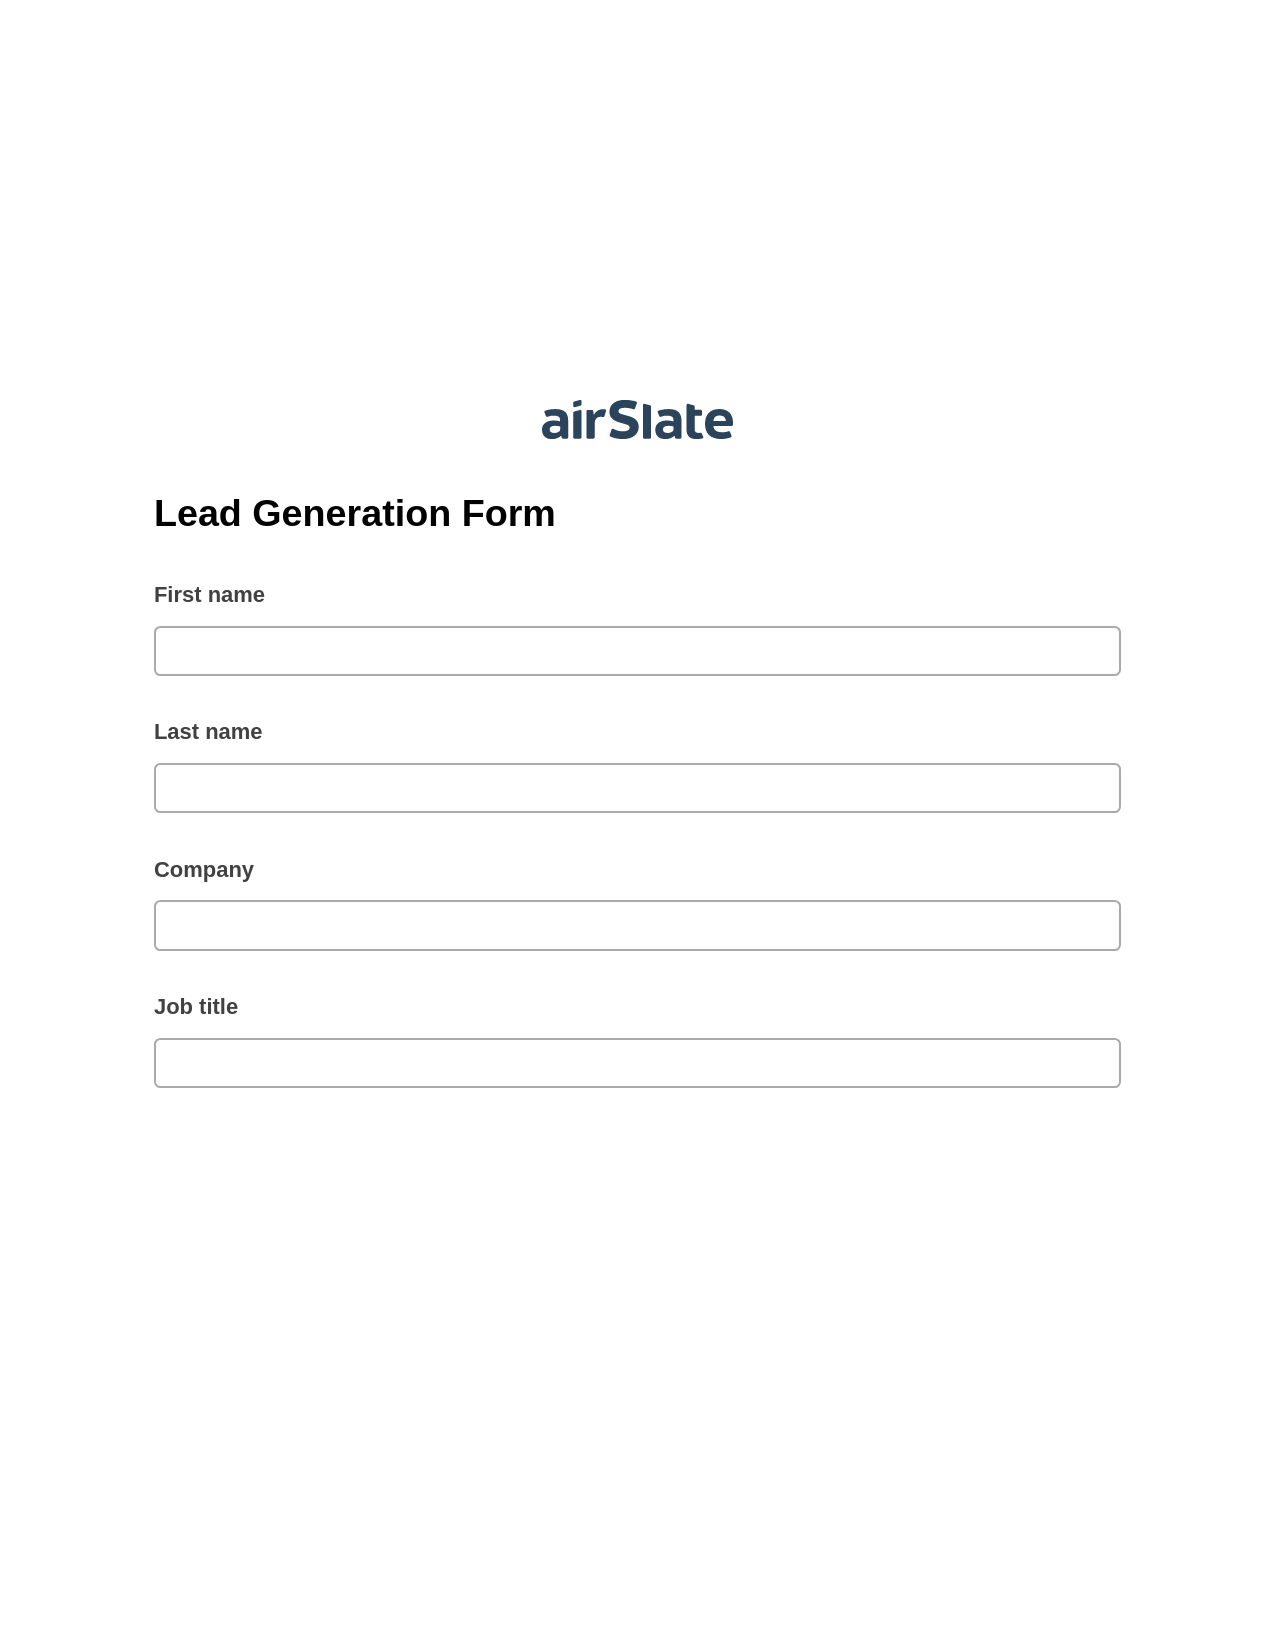 Multirole Lead Generation Form Pre-fill from CSV File Bot, Remove Tags From Slate Bot, Post-finish Document Bot